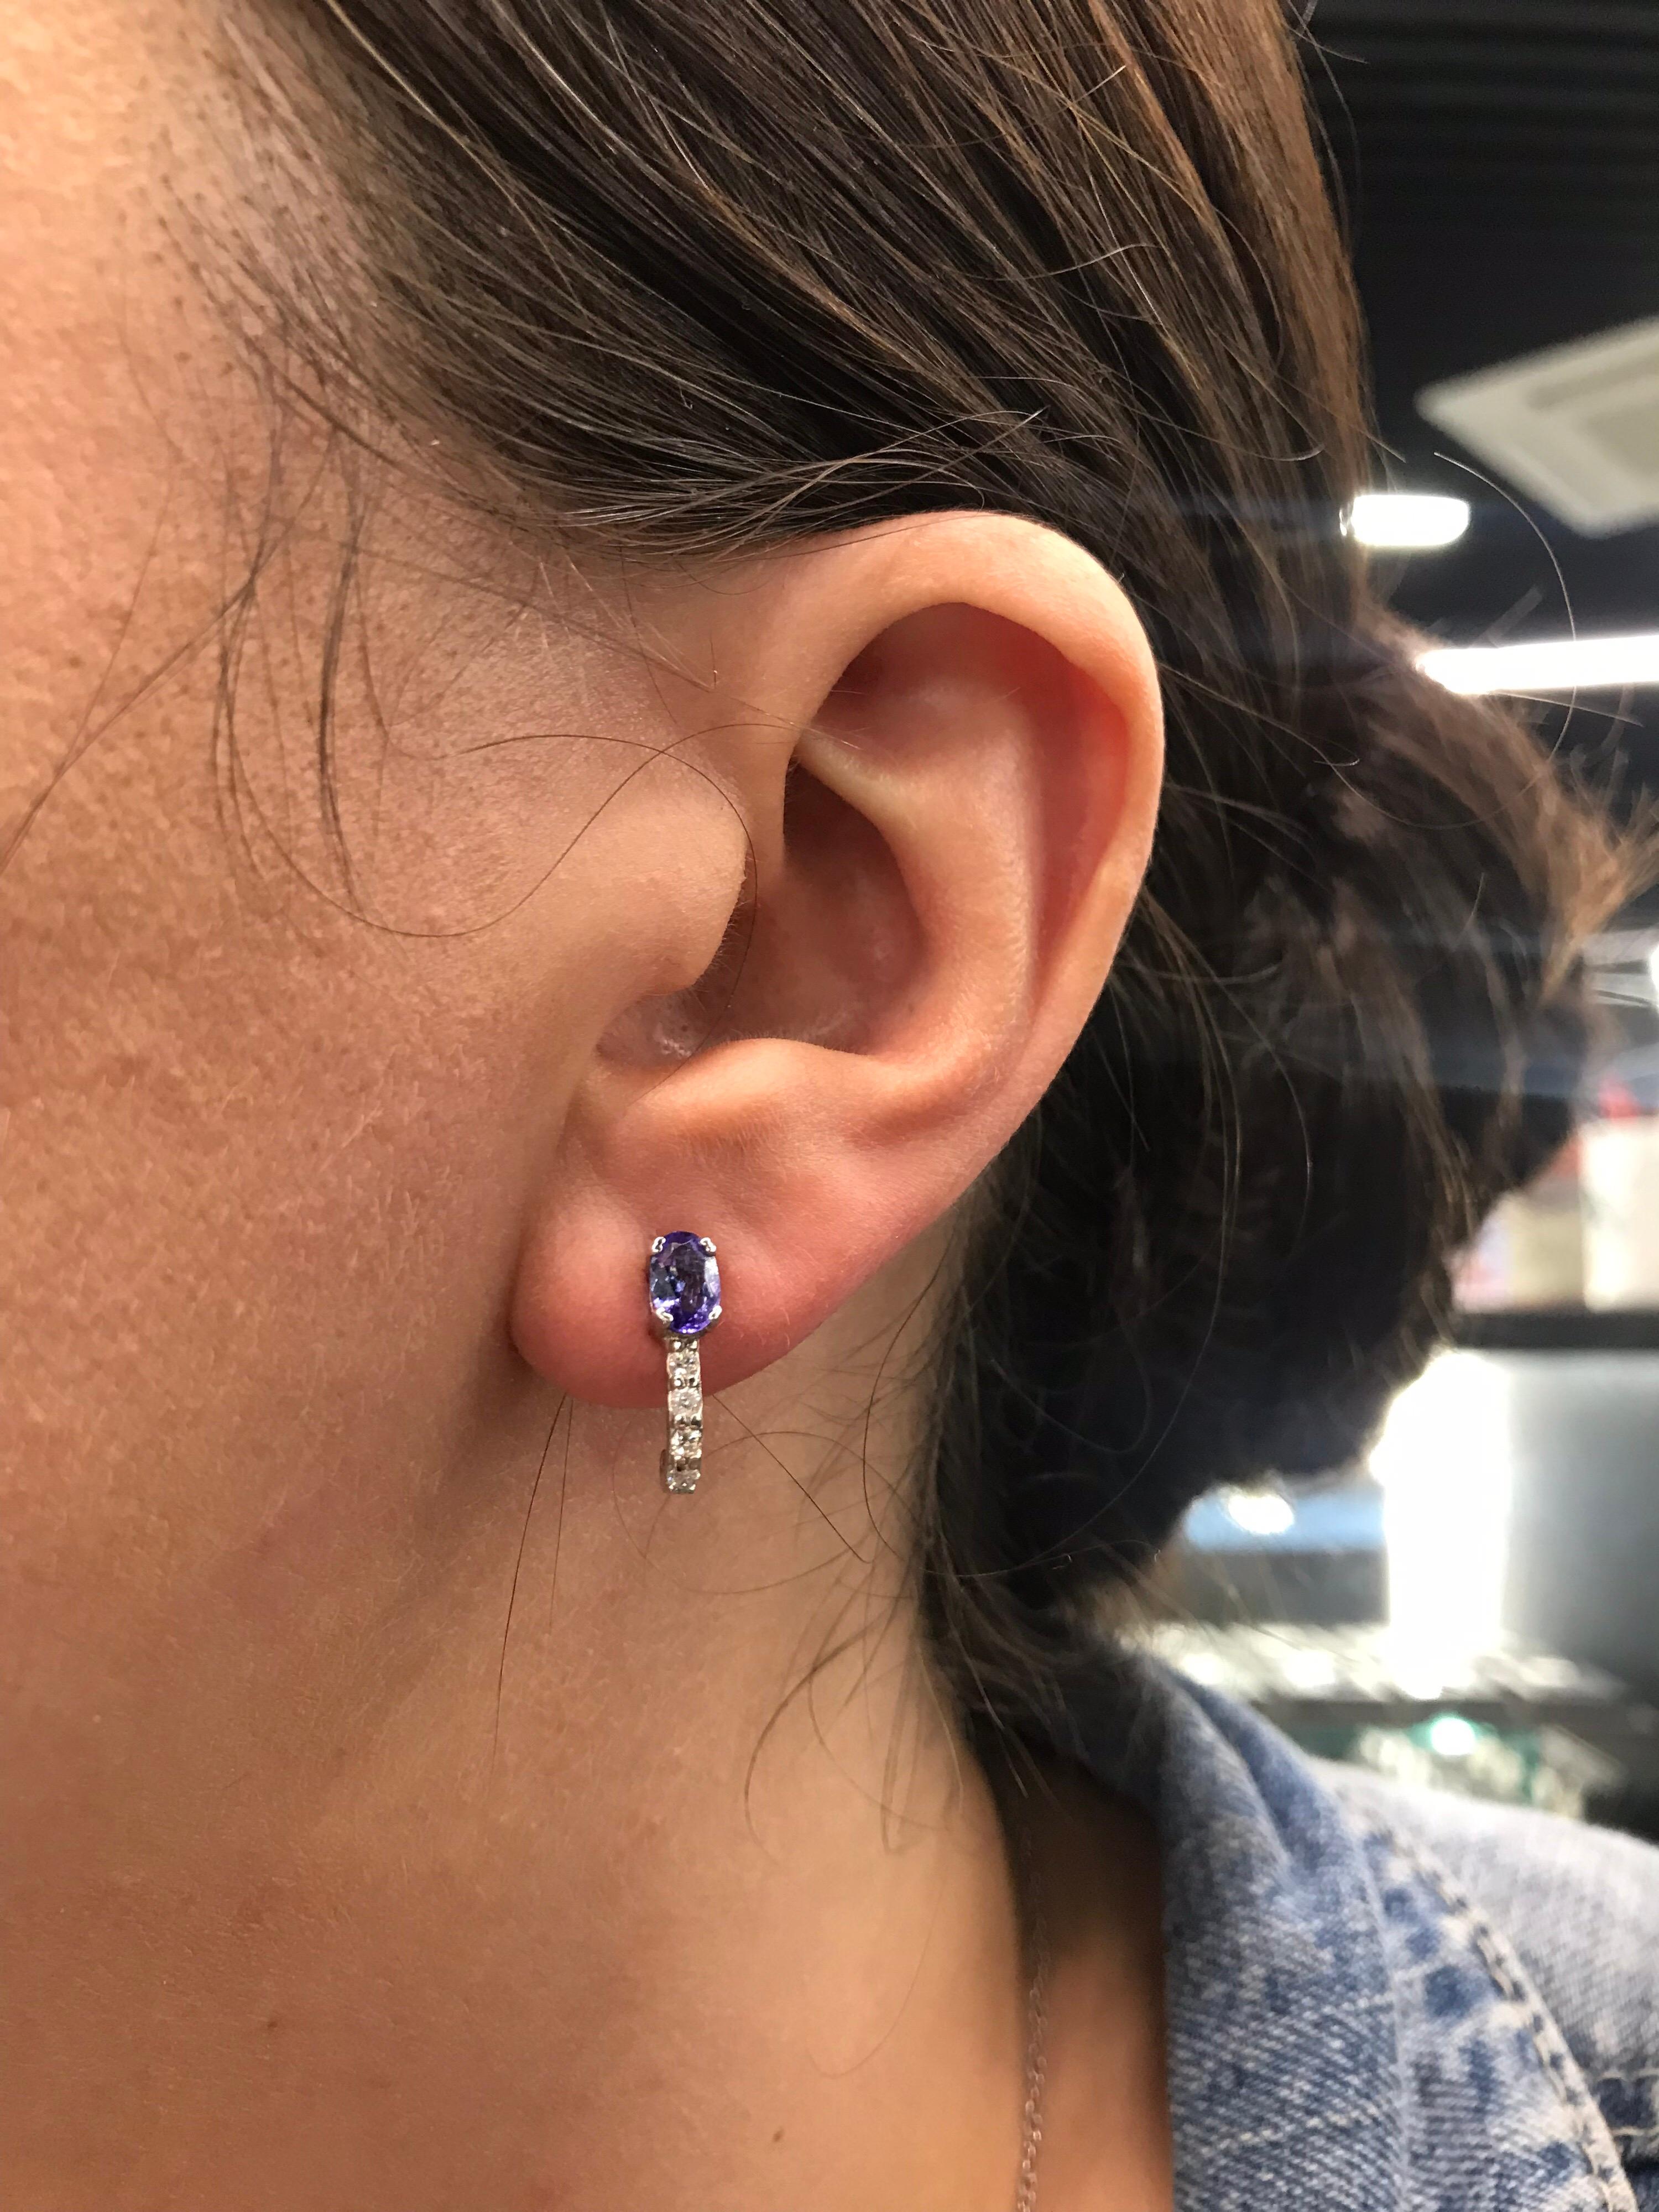 14K White Gold huggees earrings featuring two oval cut tanzanite weighing 1.00 carats with round brilliants weighing 0.17 carats.
Color G
Clartiy VS-SI